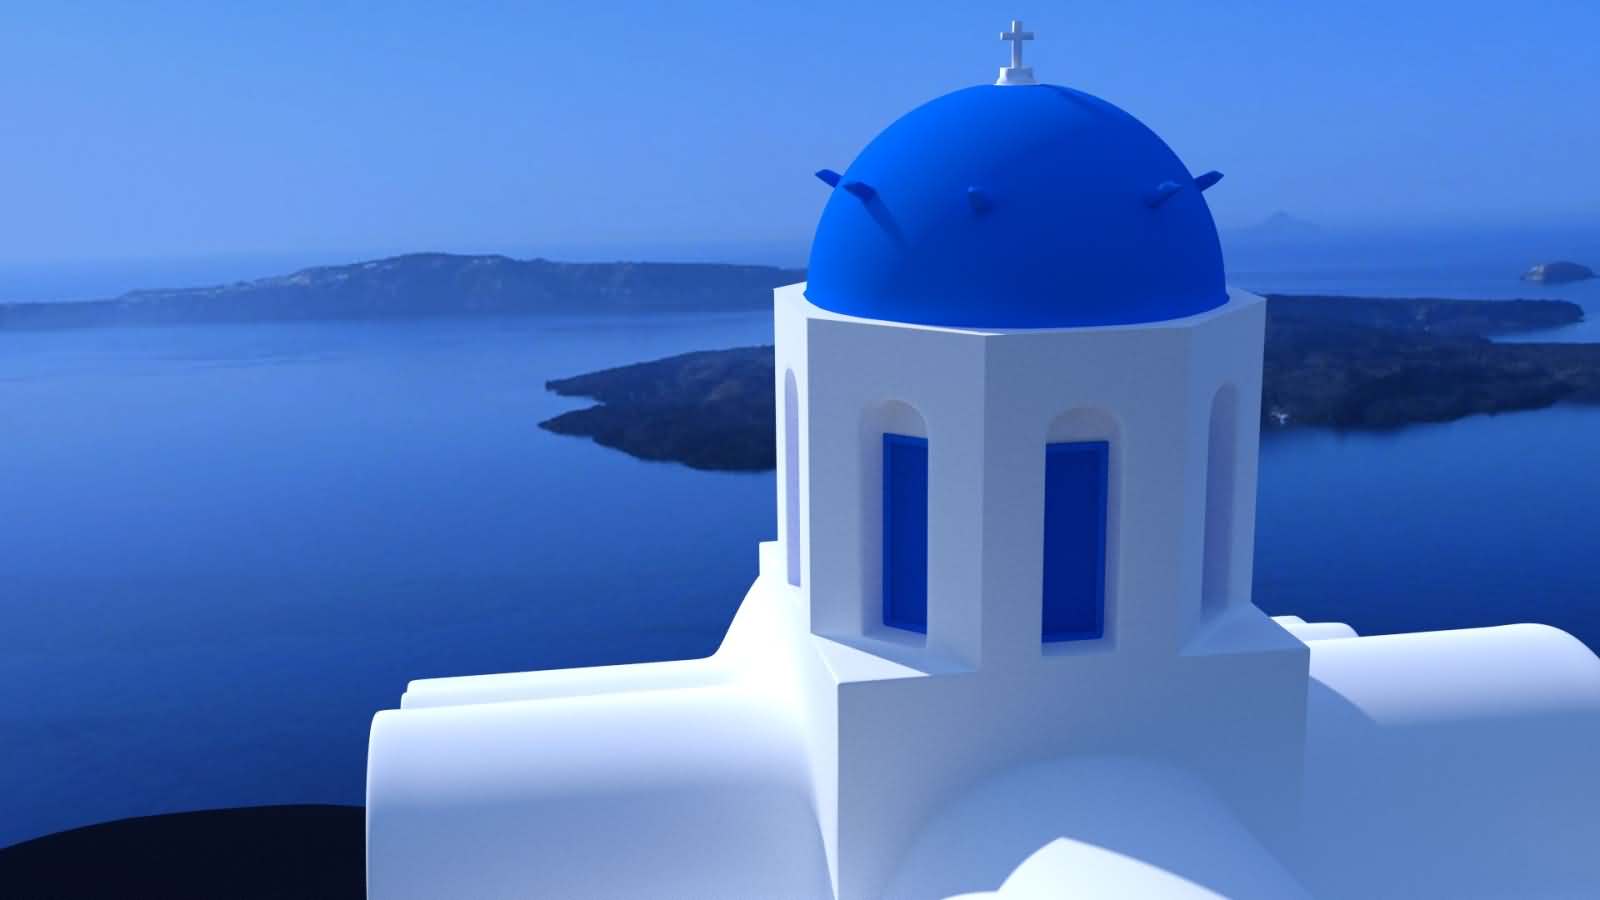 Beautiful Picture Of The Blue Dome Church